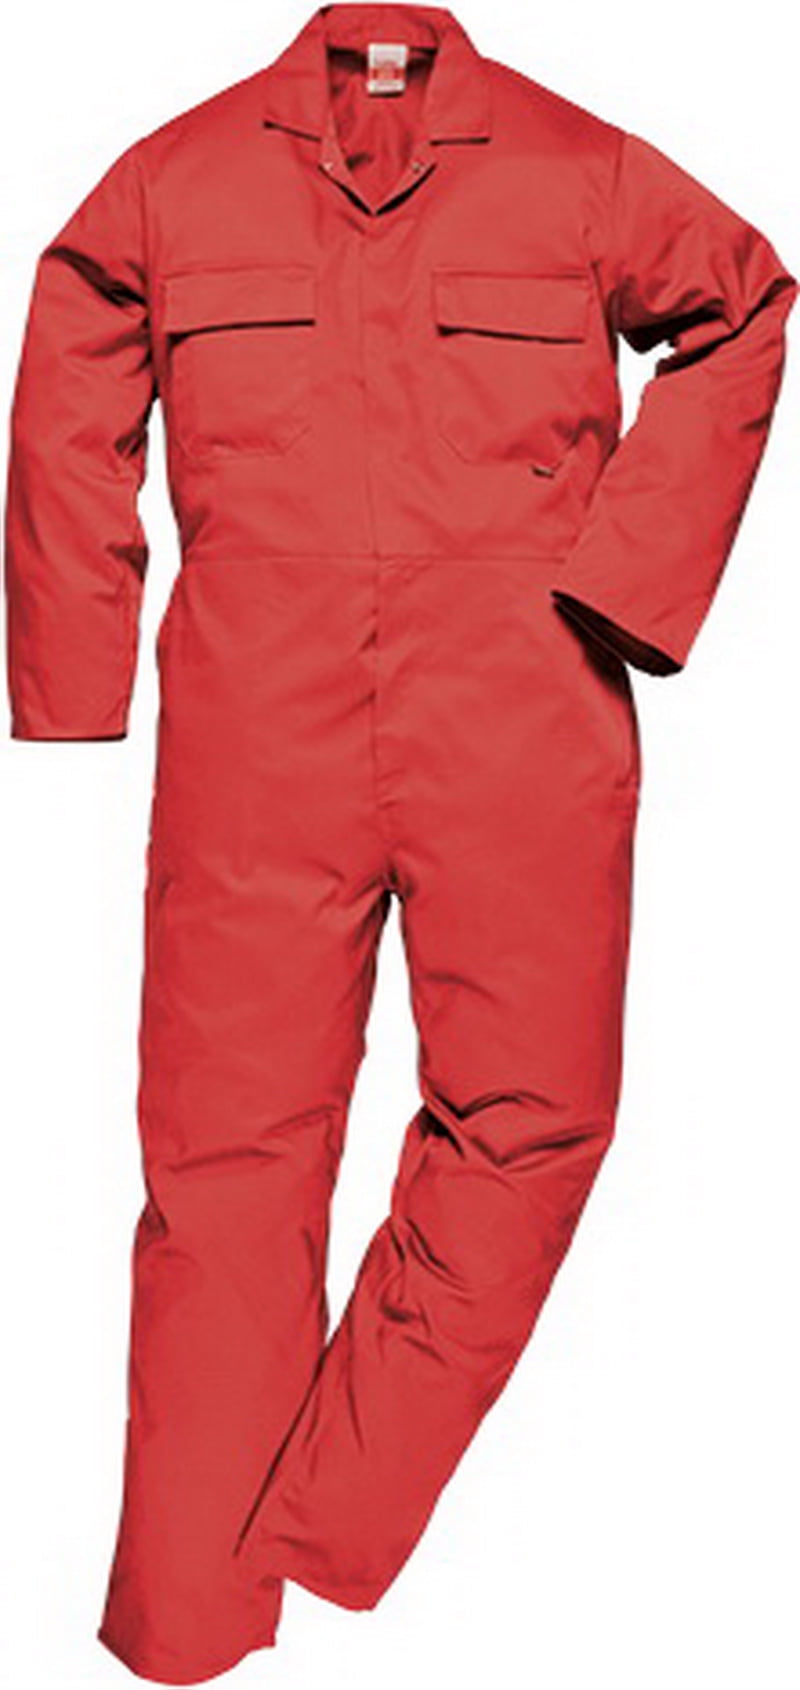 Mens Portwest Euro CoverallWorkwear Overall Boiler SuitS999 